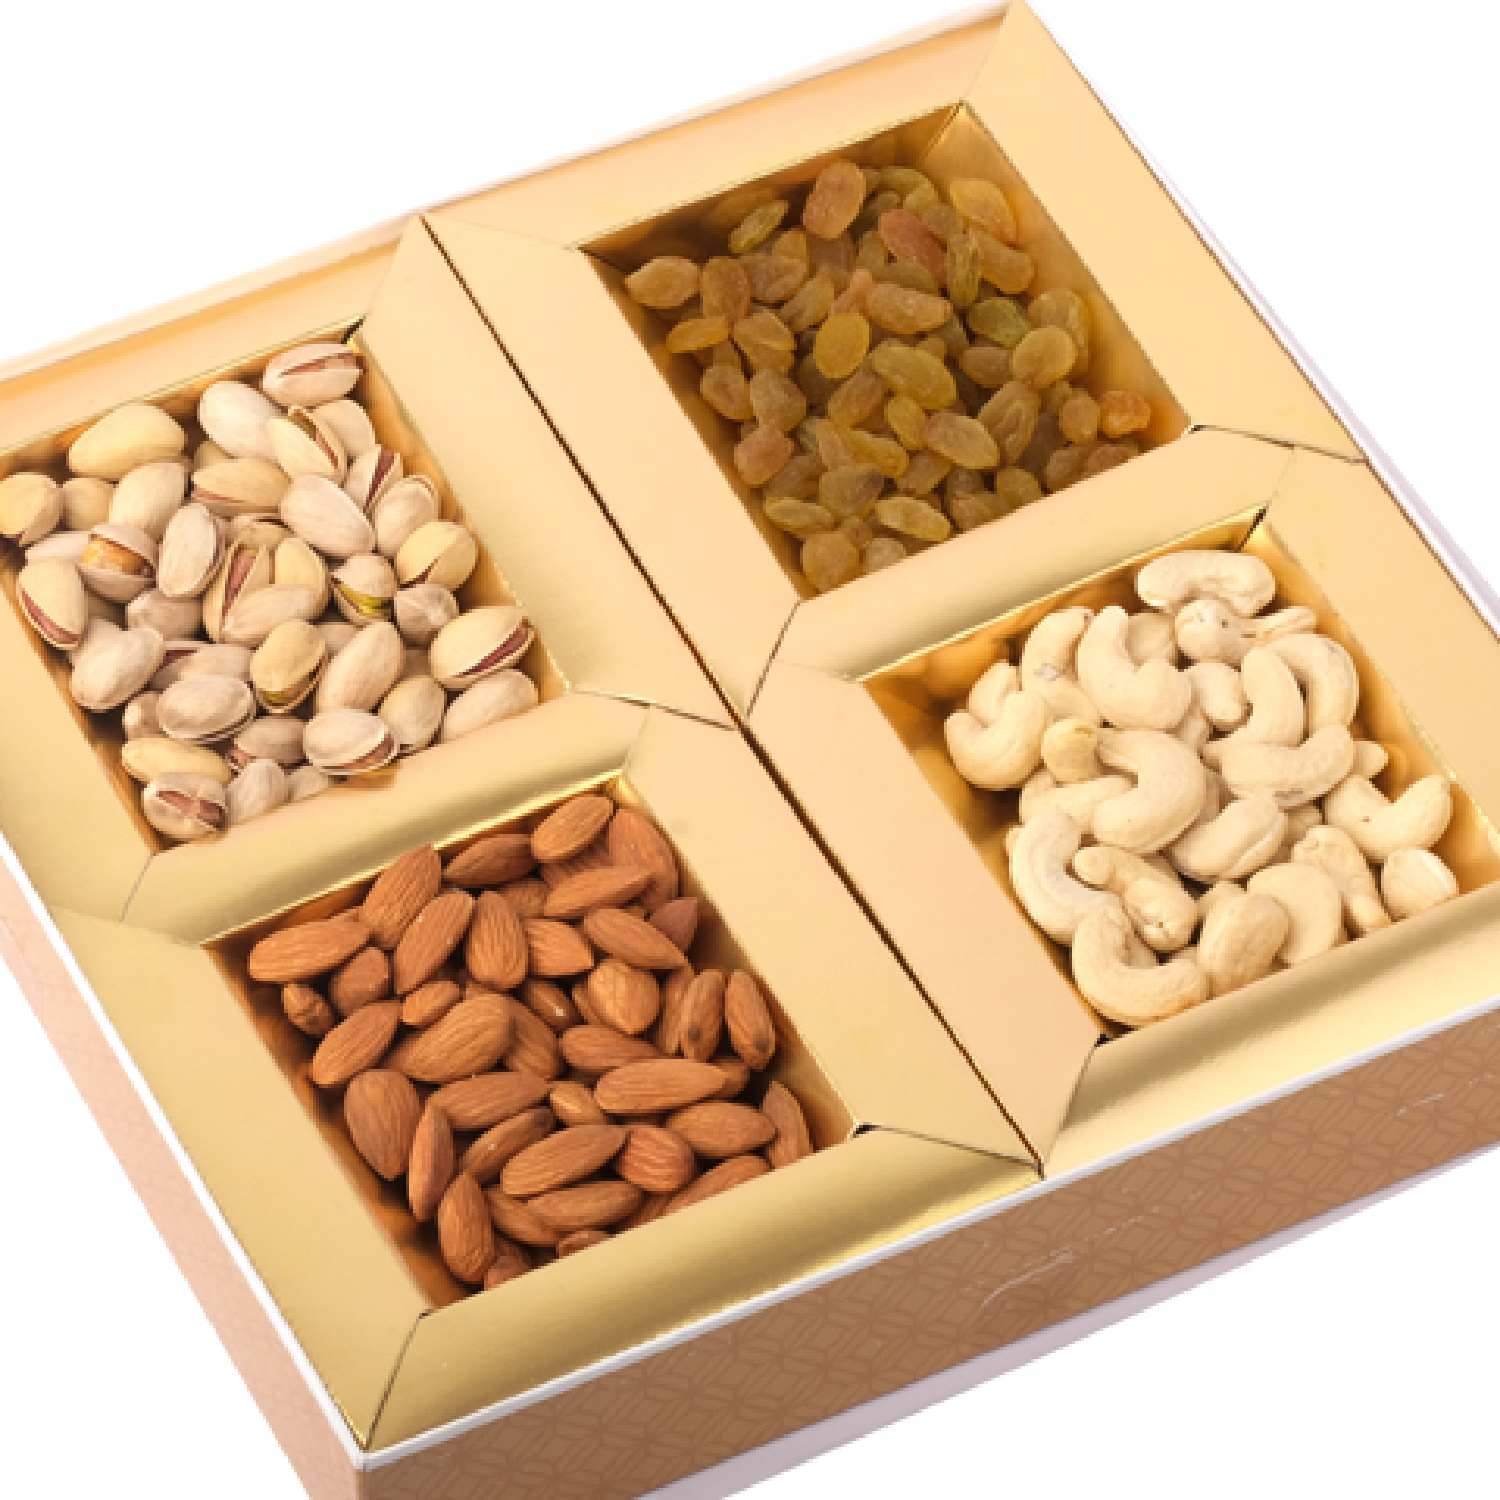 Buy our sympathy dried fruit collection gift tray at broadwaybasketeers.com